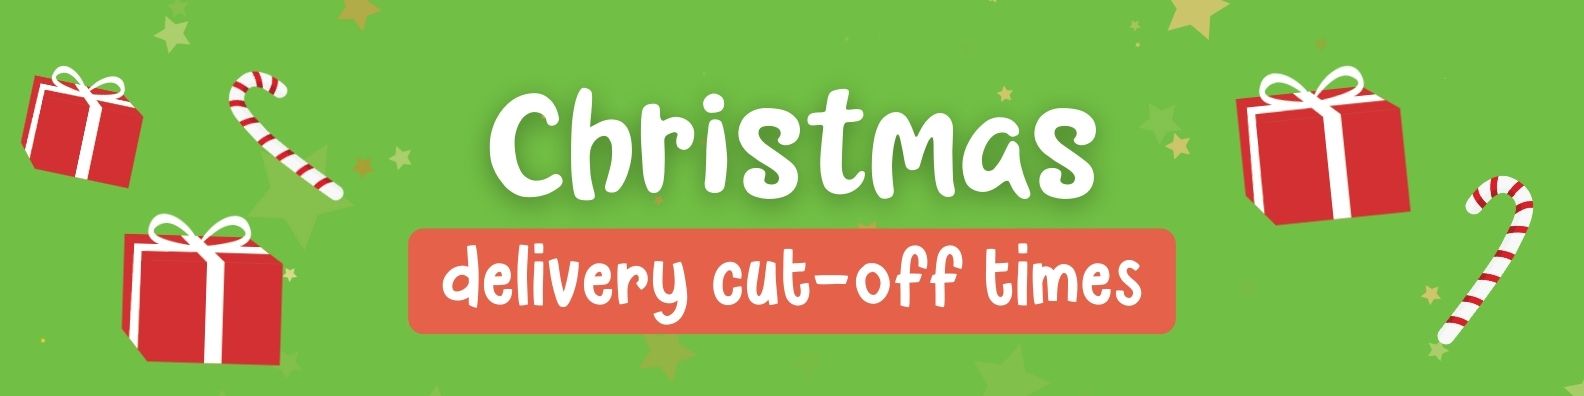 Christmas Delivery Cut off Times